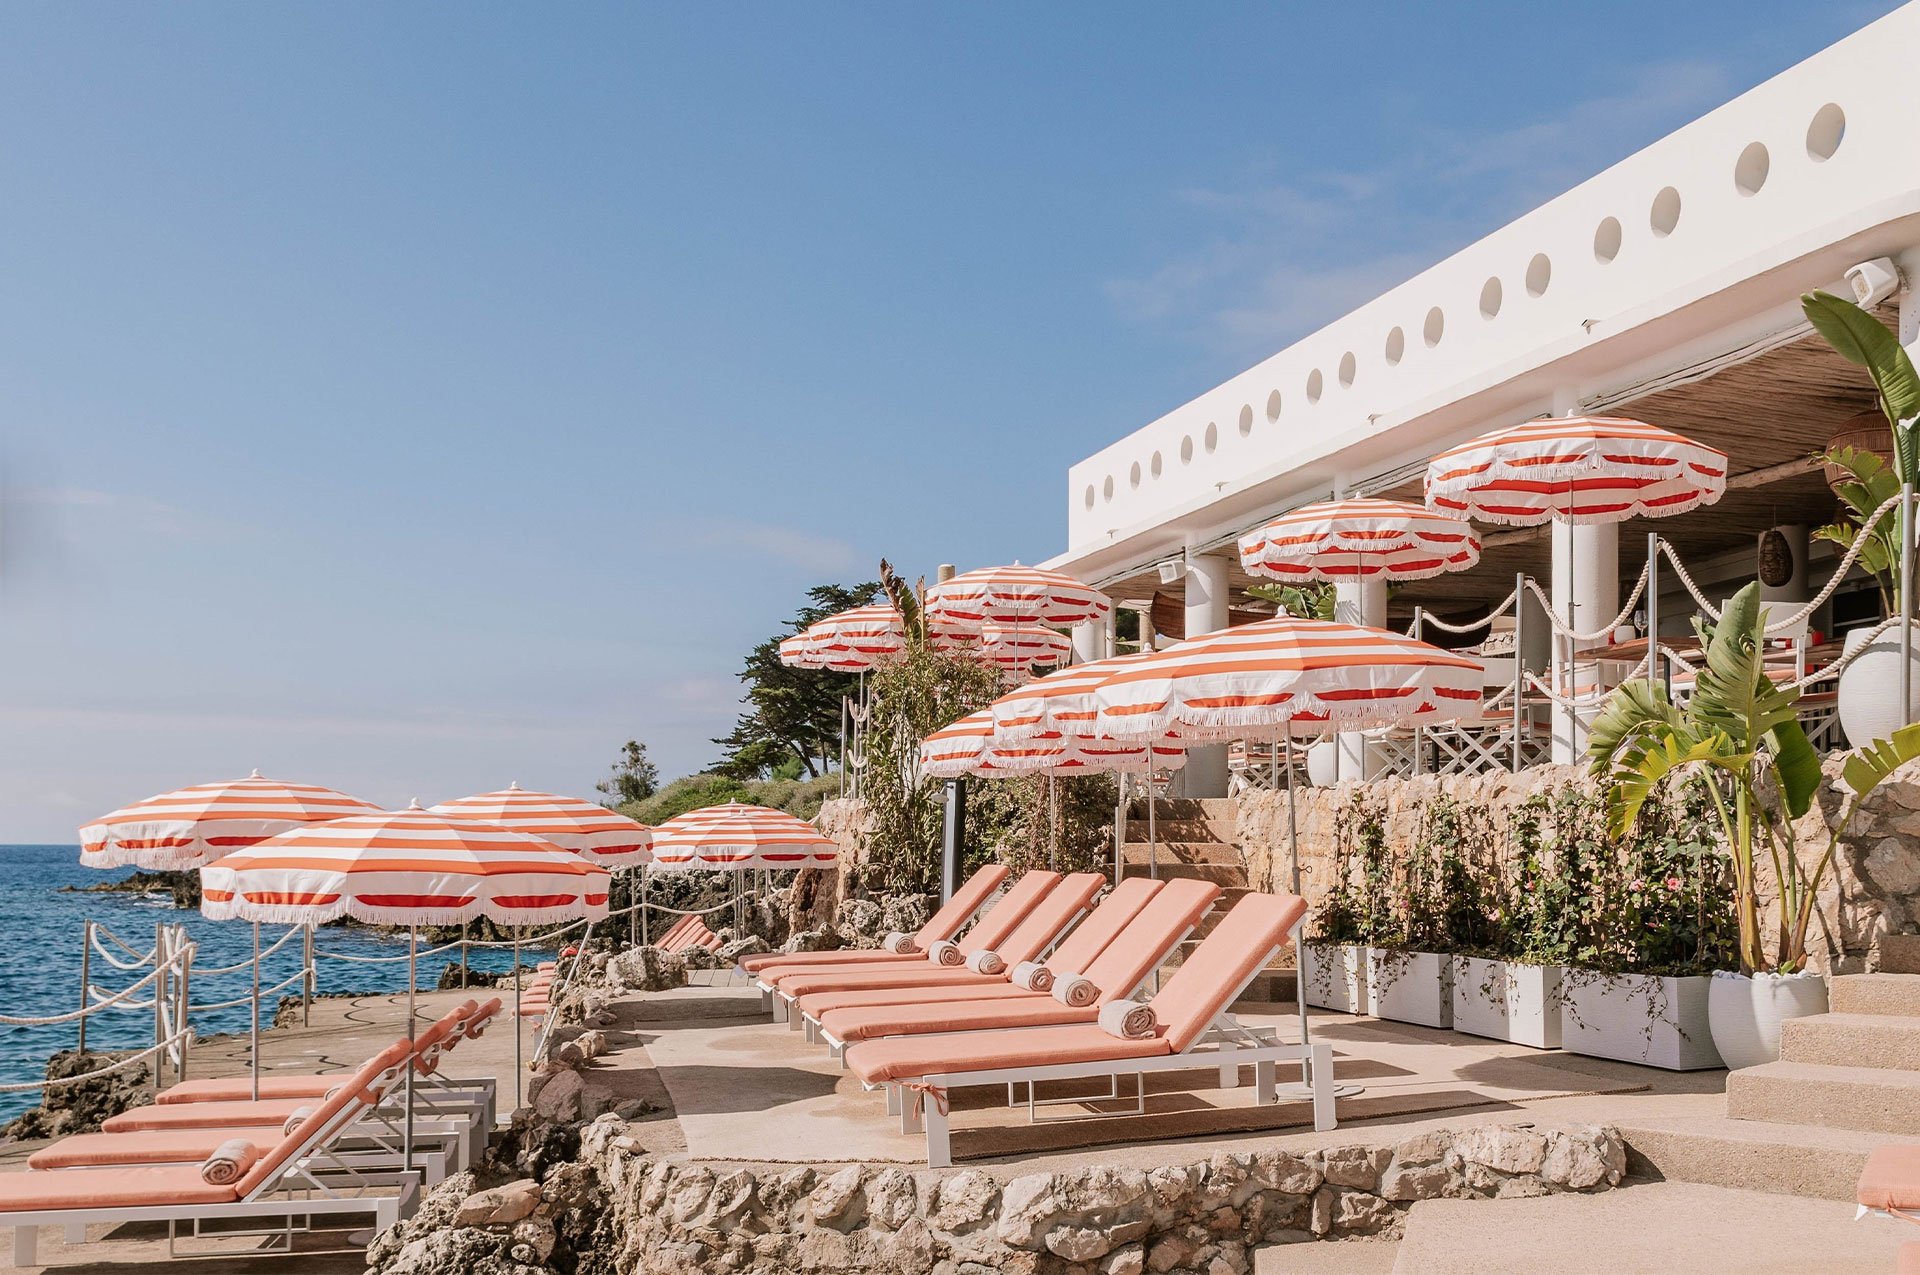 Maybourne La Plage: peach coloured sun beds in tiers facing the sea, with striped parasols to match.